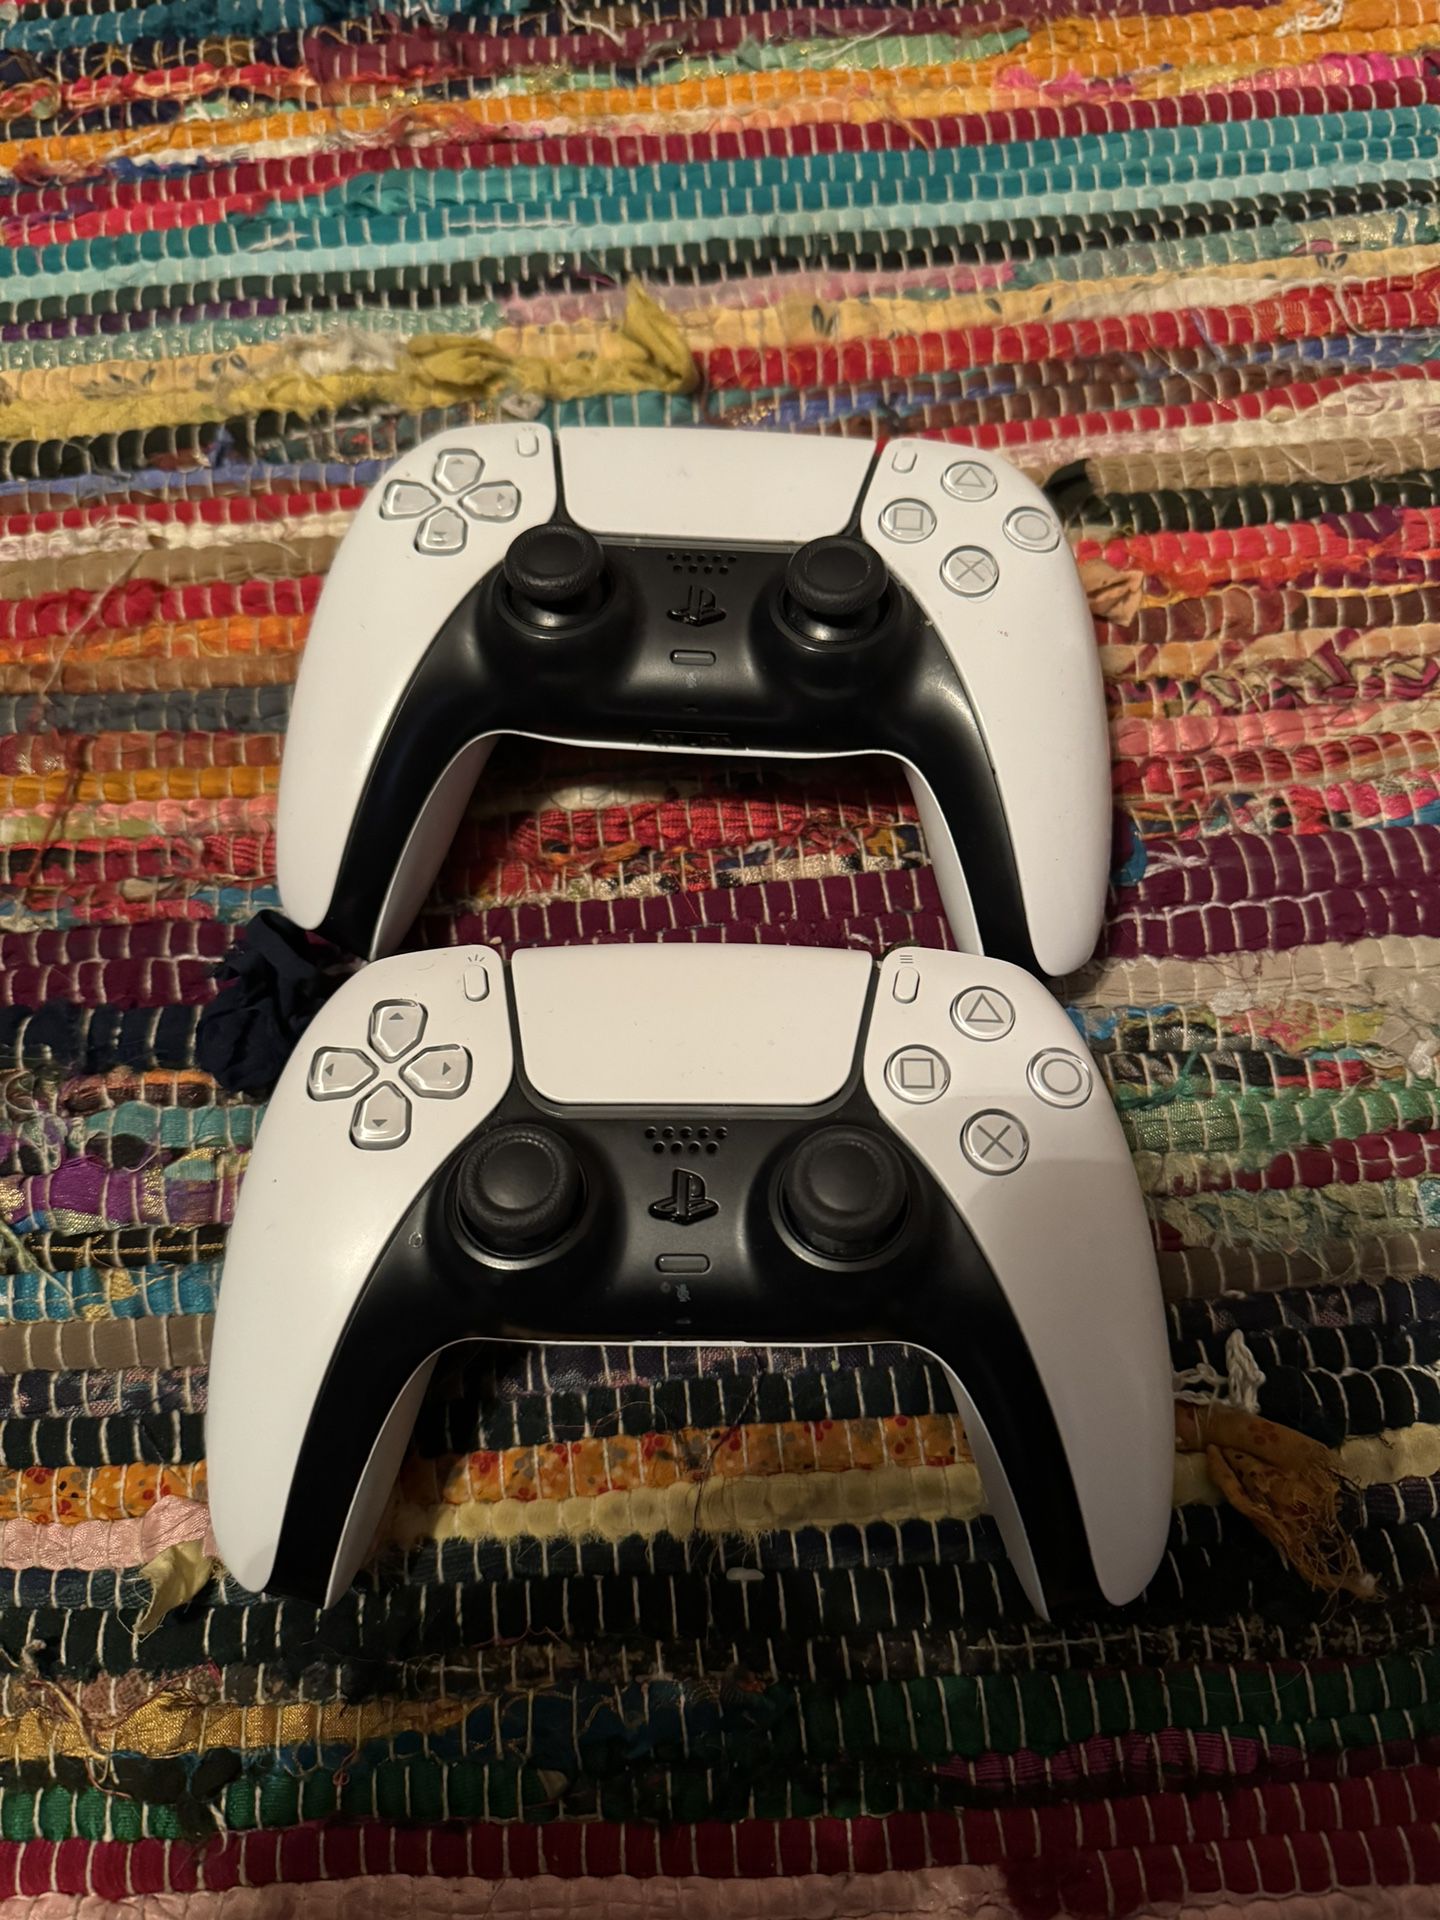 $100 For 2 PS5 Controllers.